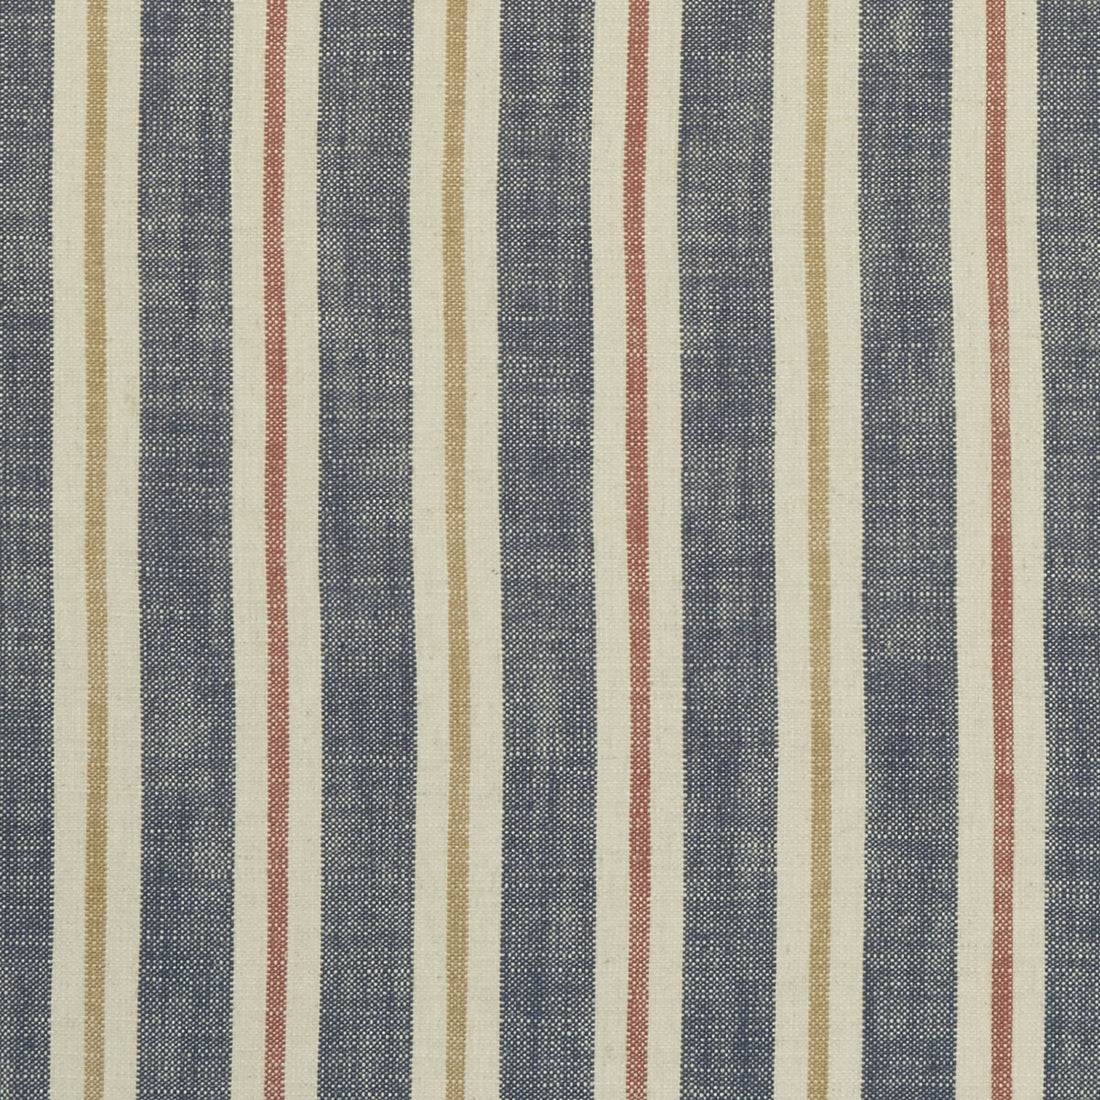 Sackville Stripe fabric in midnight/spice color - pattern F1046/04.CAC.0 - by Clarke And Clarke in the Clarke &amp; Clarke Castle Garden collection